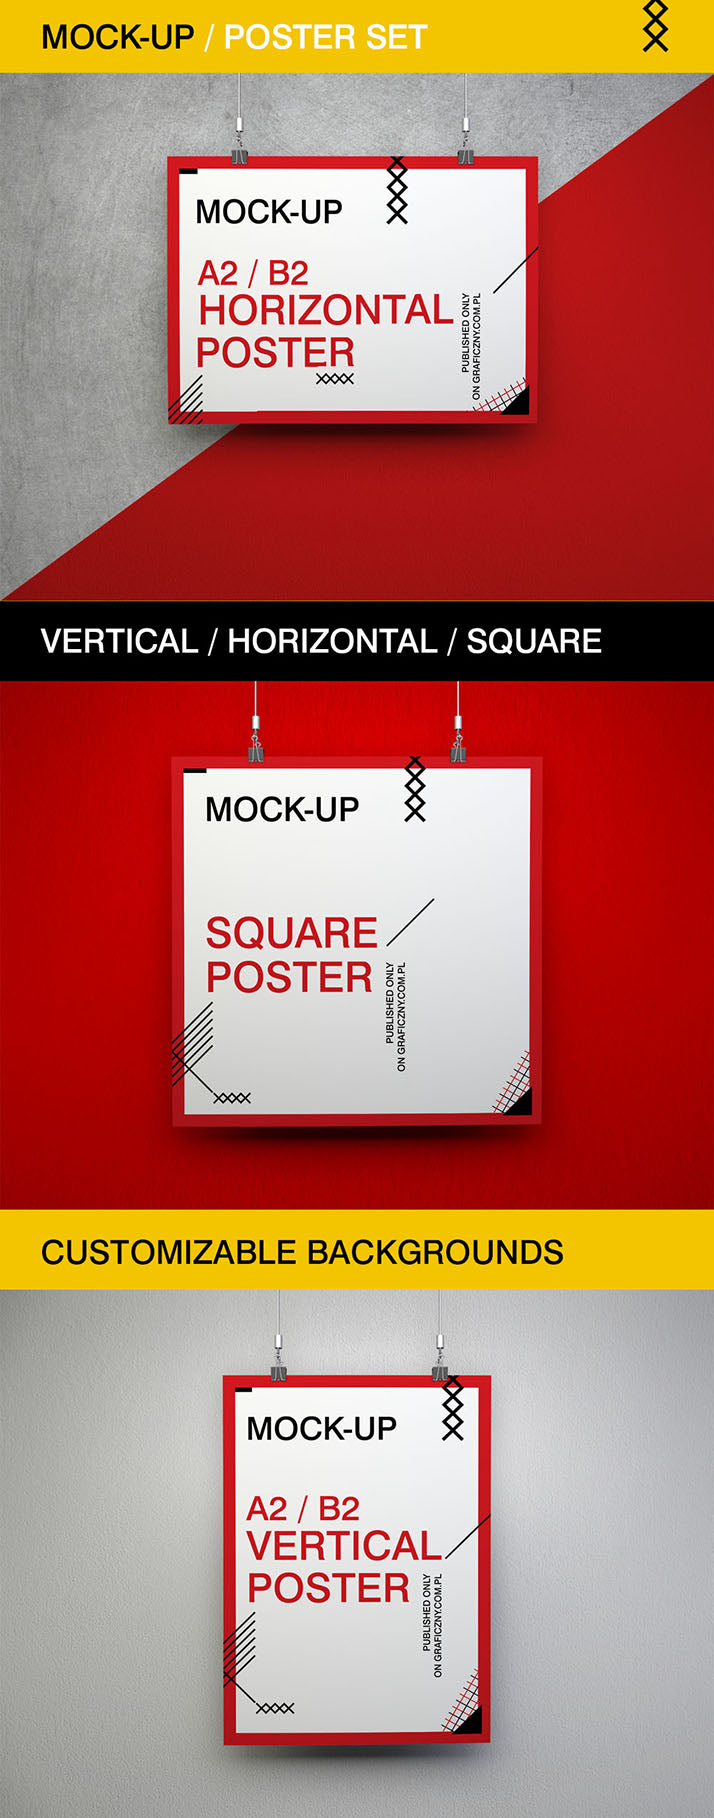 Free Horizontal, Square and Vertical Poster Mockups